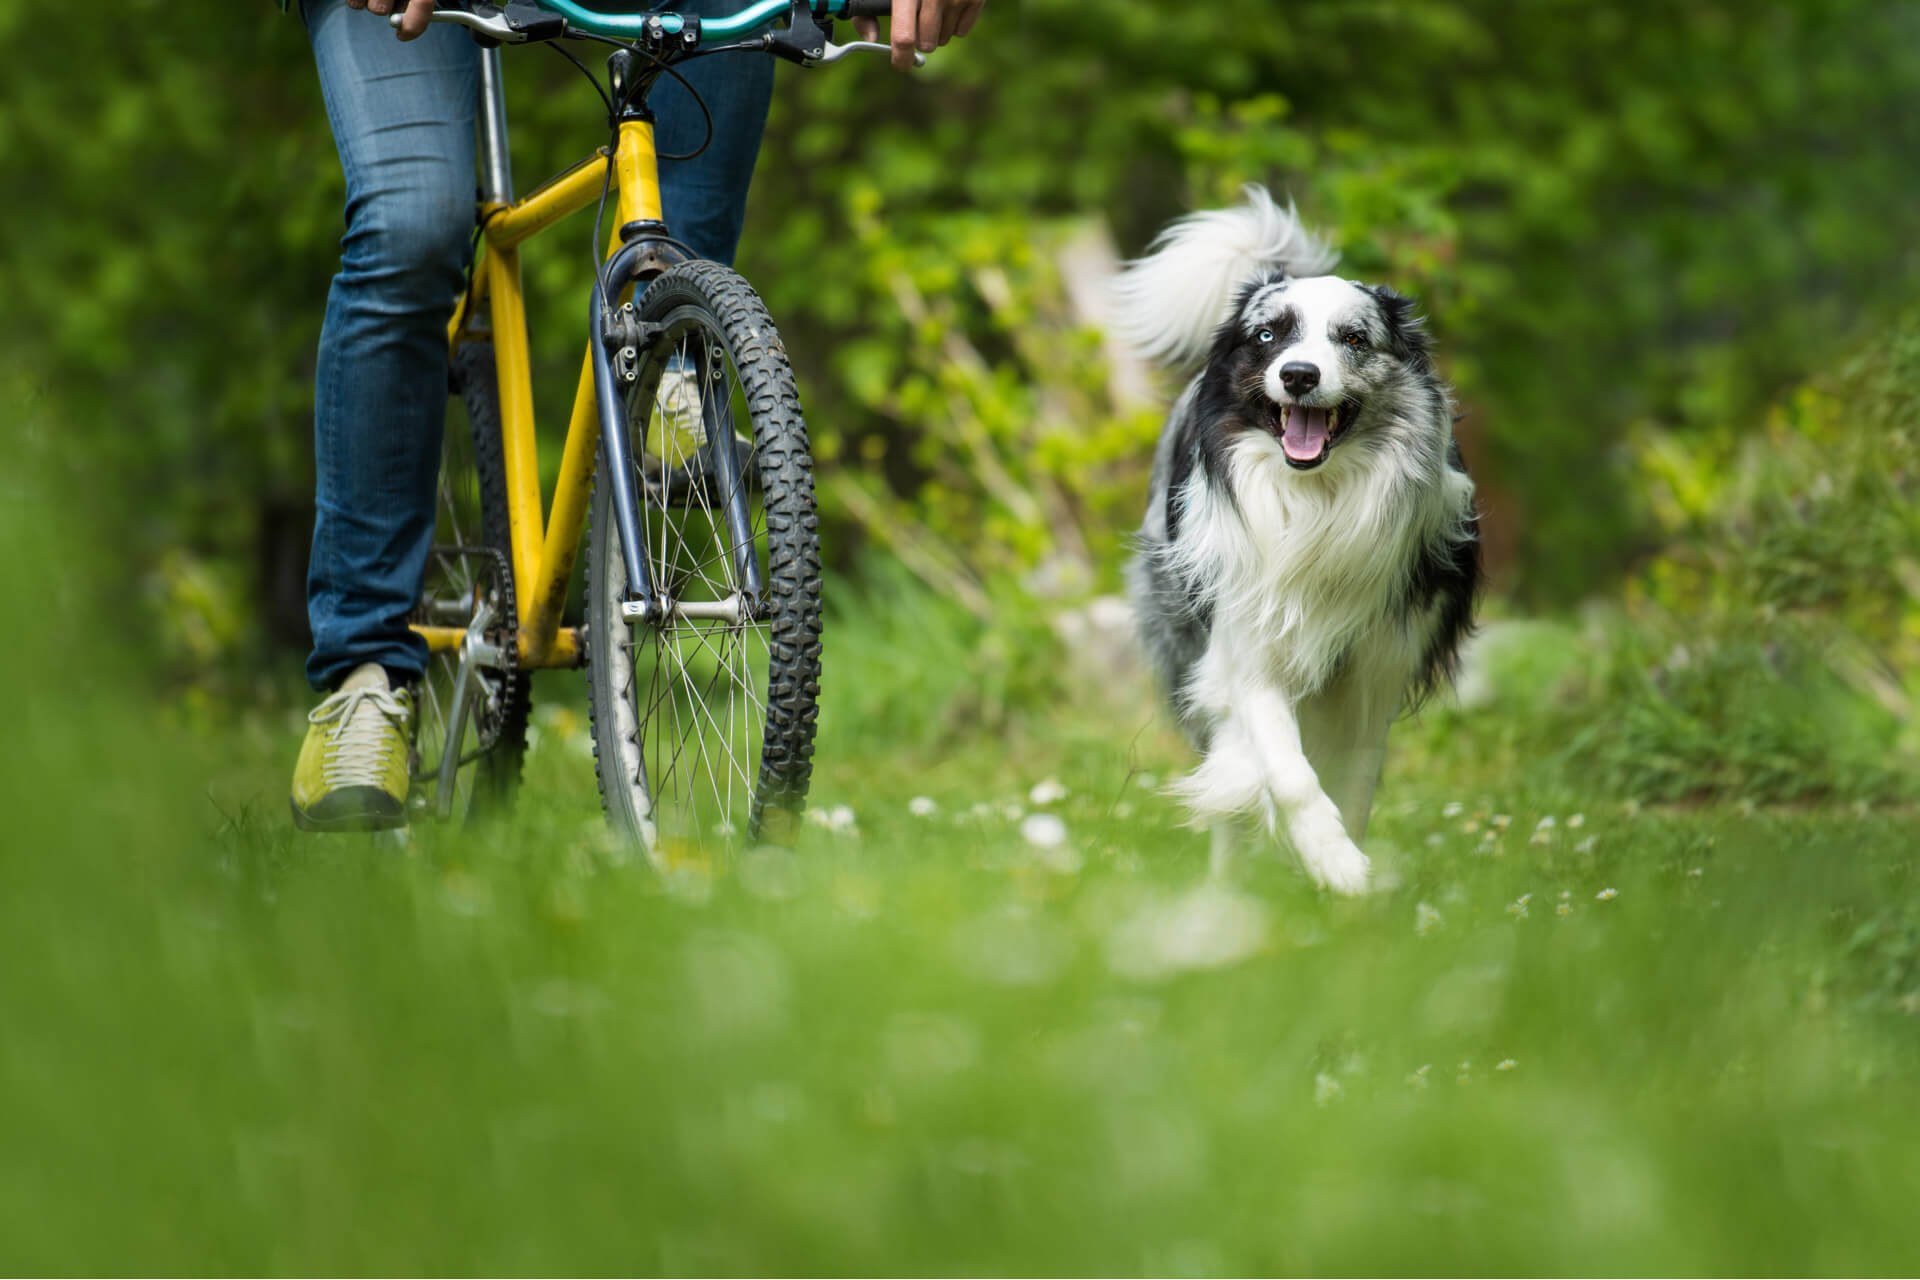 Is it illegal to walk a dog on a bike?